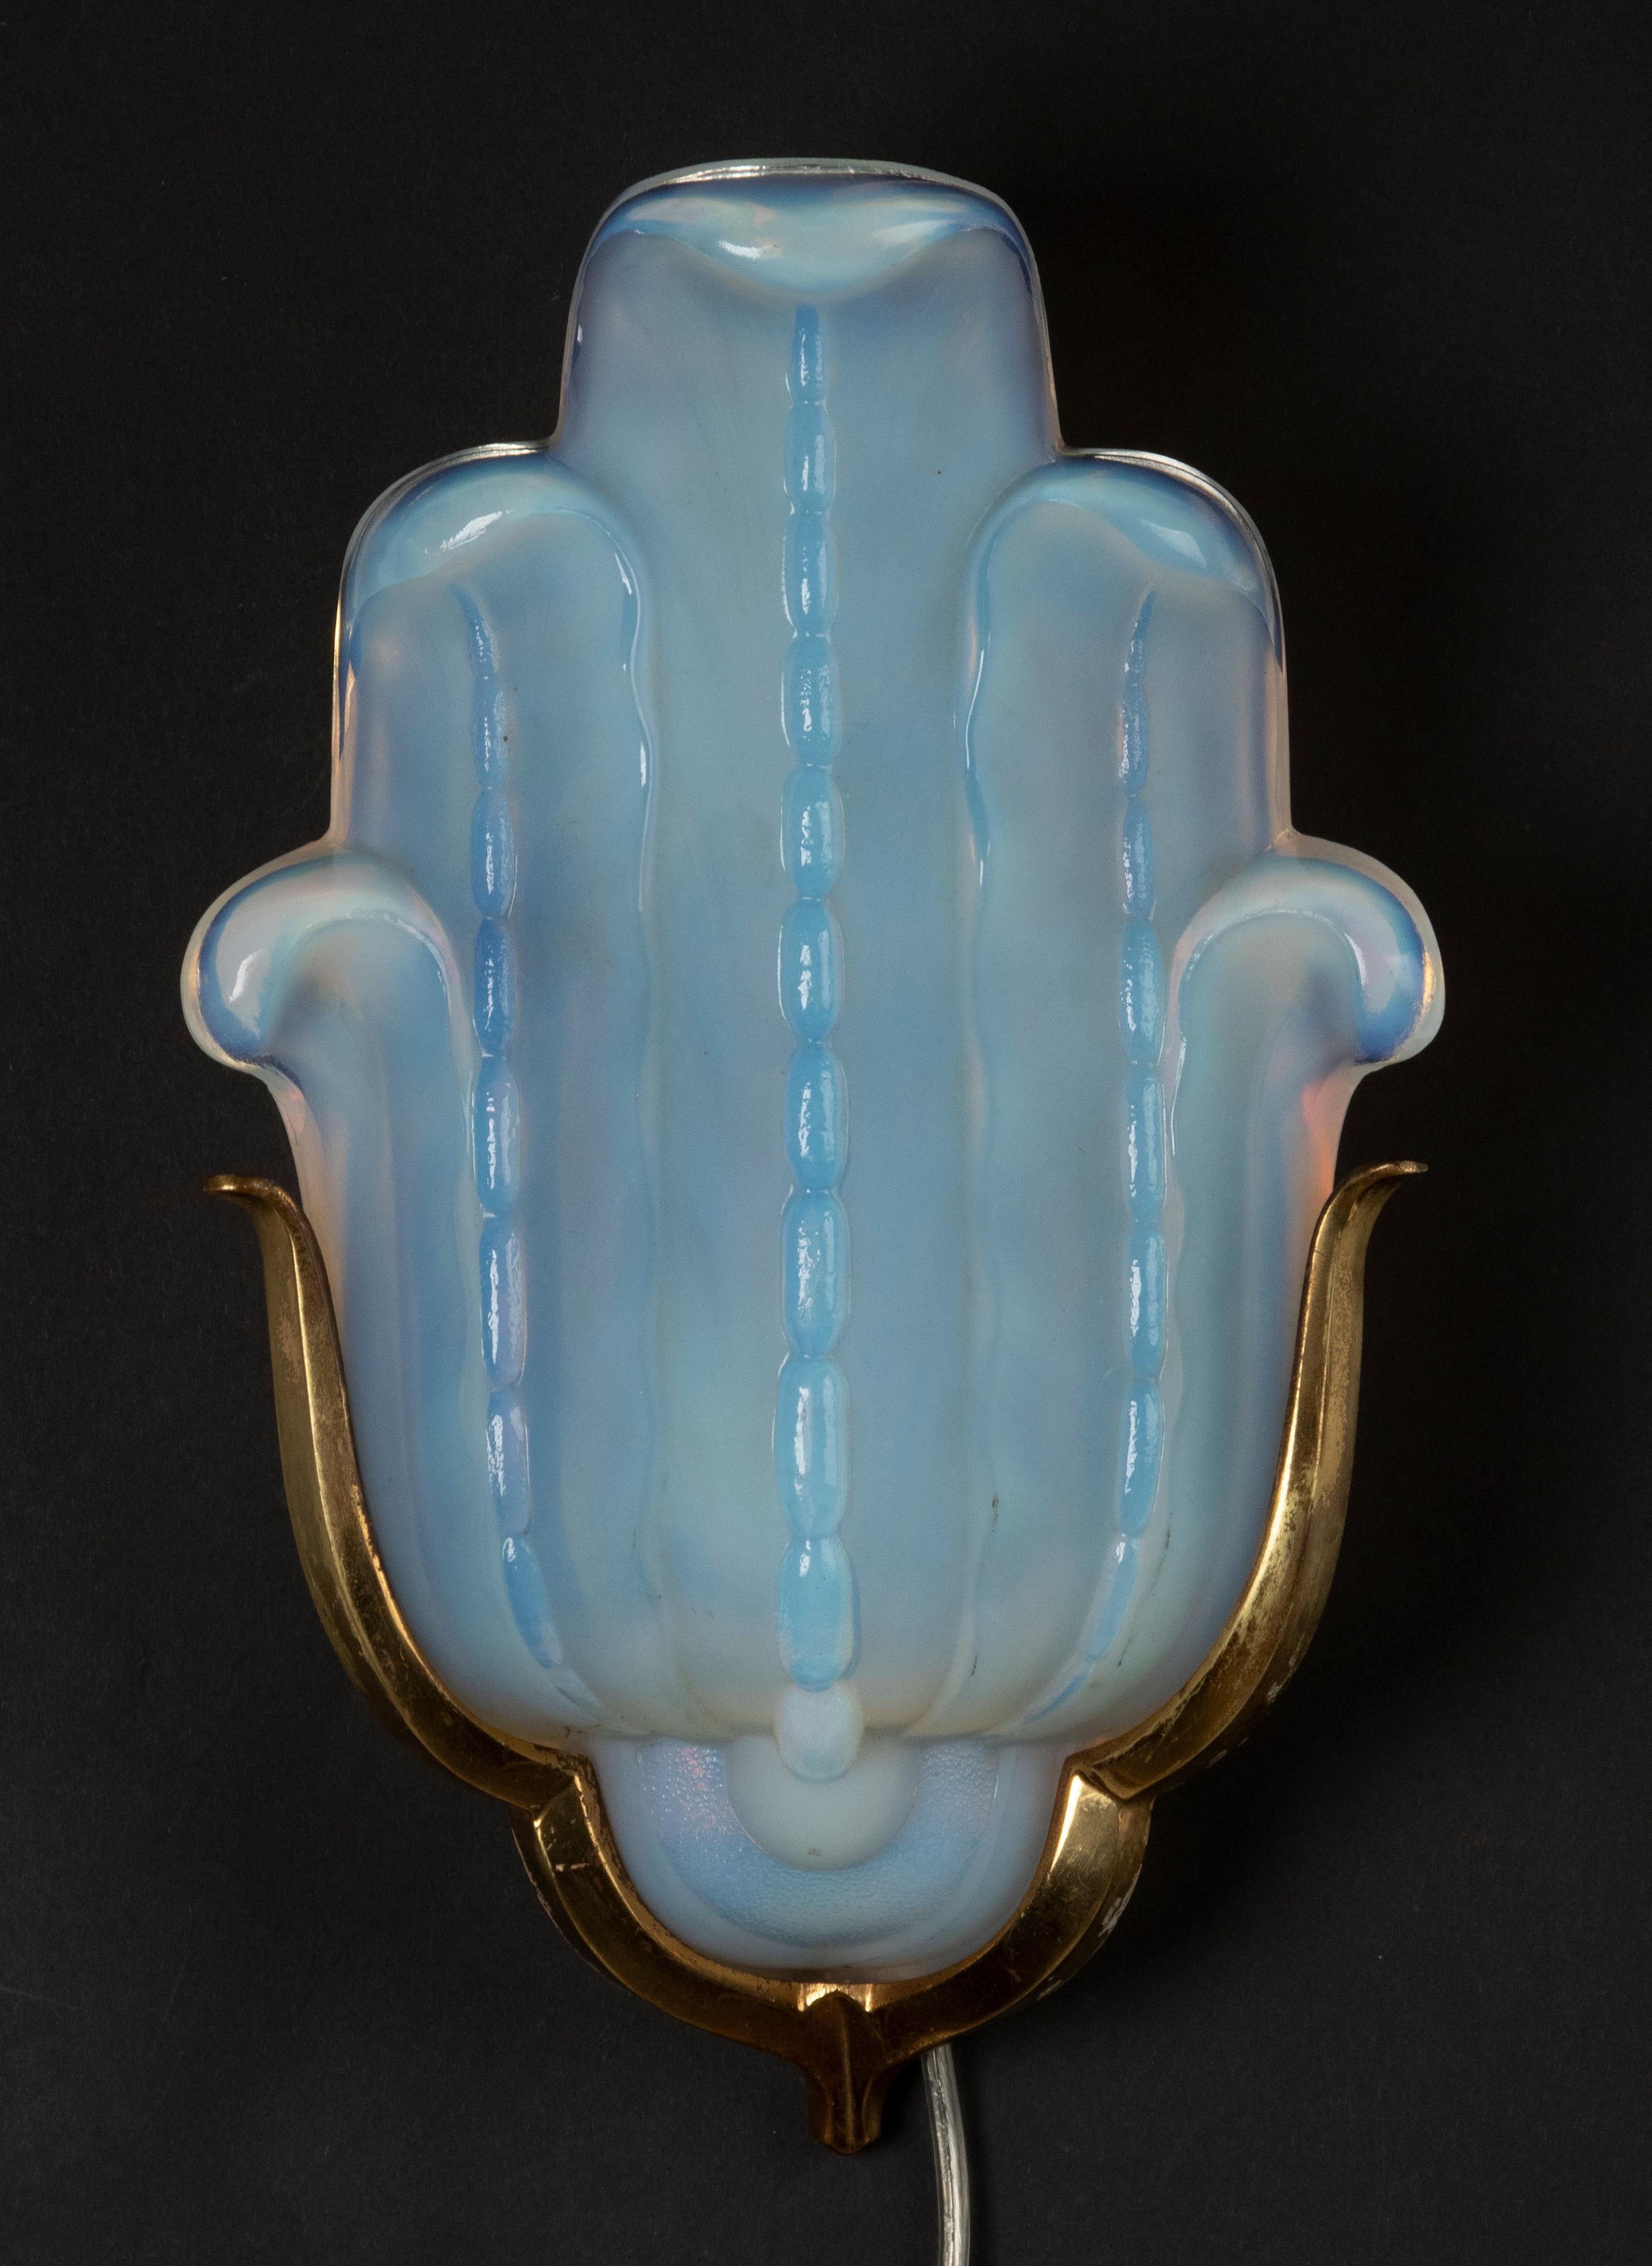 A single Art Deco wall light with an acanthus leaves shaped opalescent glass, signed Ezan, France. The opaline has a beautiful deep blue mother-of-pearl color. On a metal mount with copper color finish. On both sides the copper finish have some